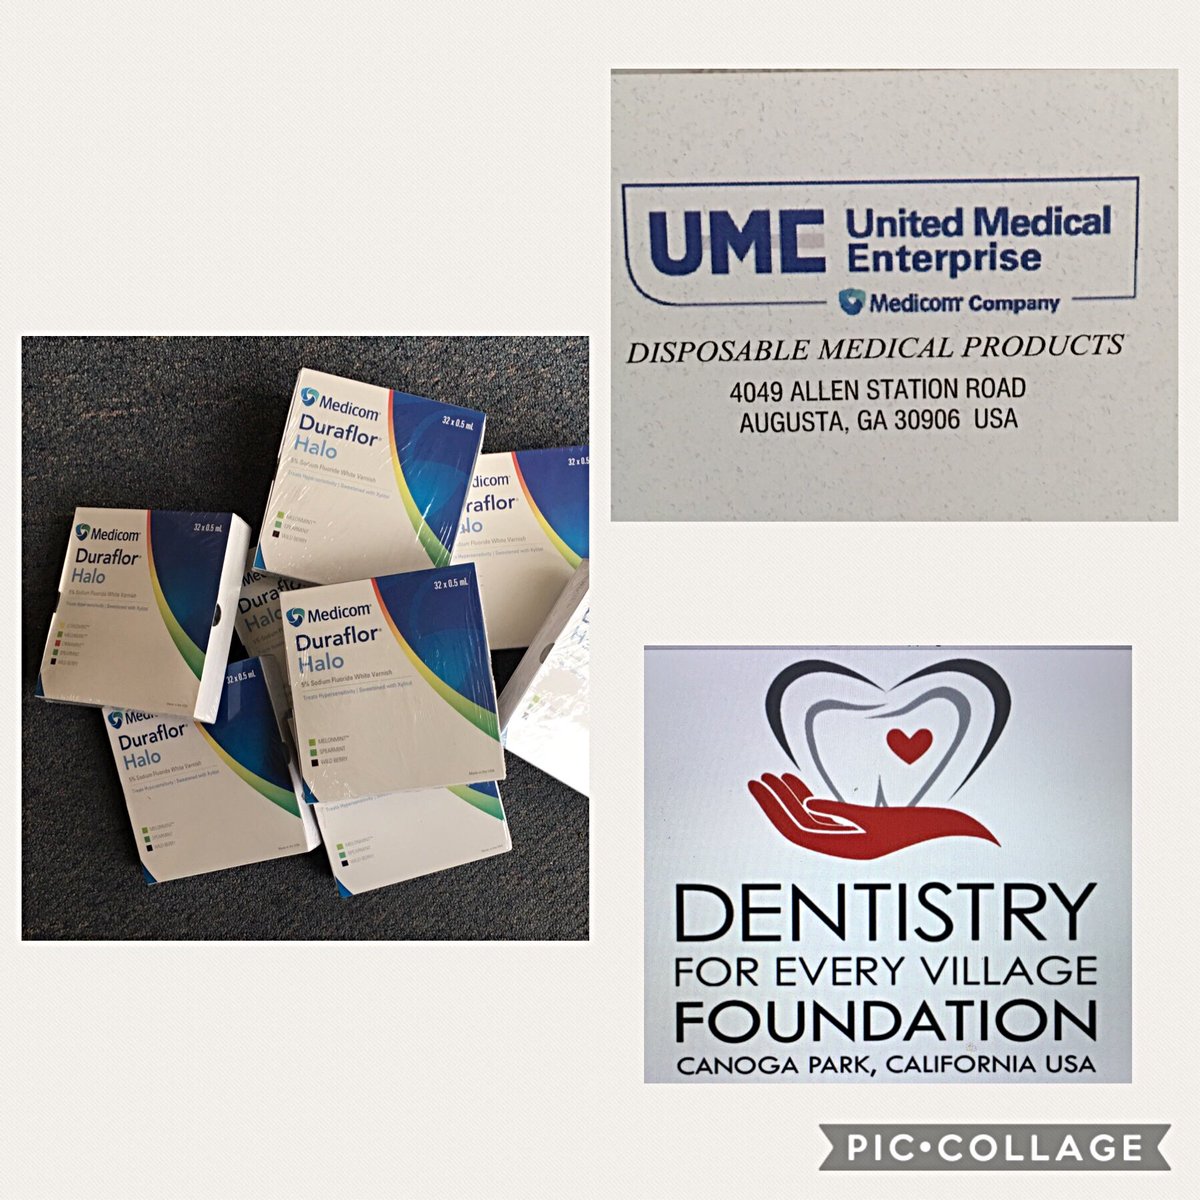 Thank you United Medical Enterprise of Augusta, Georgia for the fluoride varnish donated for our charity dental mission in the Philippines next month. More than 250 patients will benefit fron the donation!!  #givingsmiles #charity #dentalmissions #helpinghands #nomorecavities